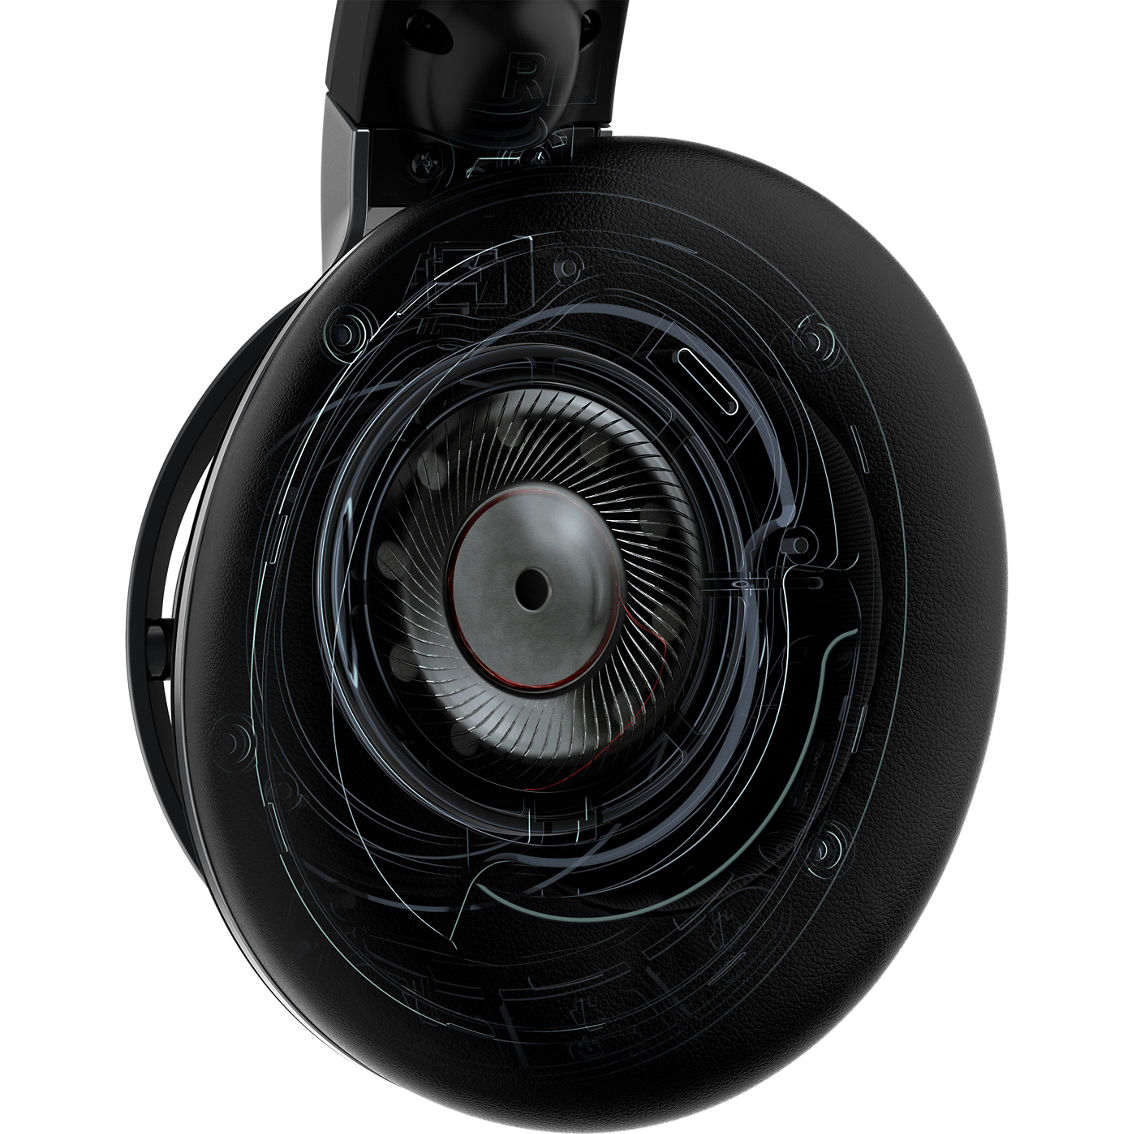 Turtle Beach XB Stealth Pro - Image 9 of 10